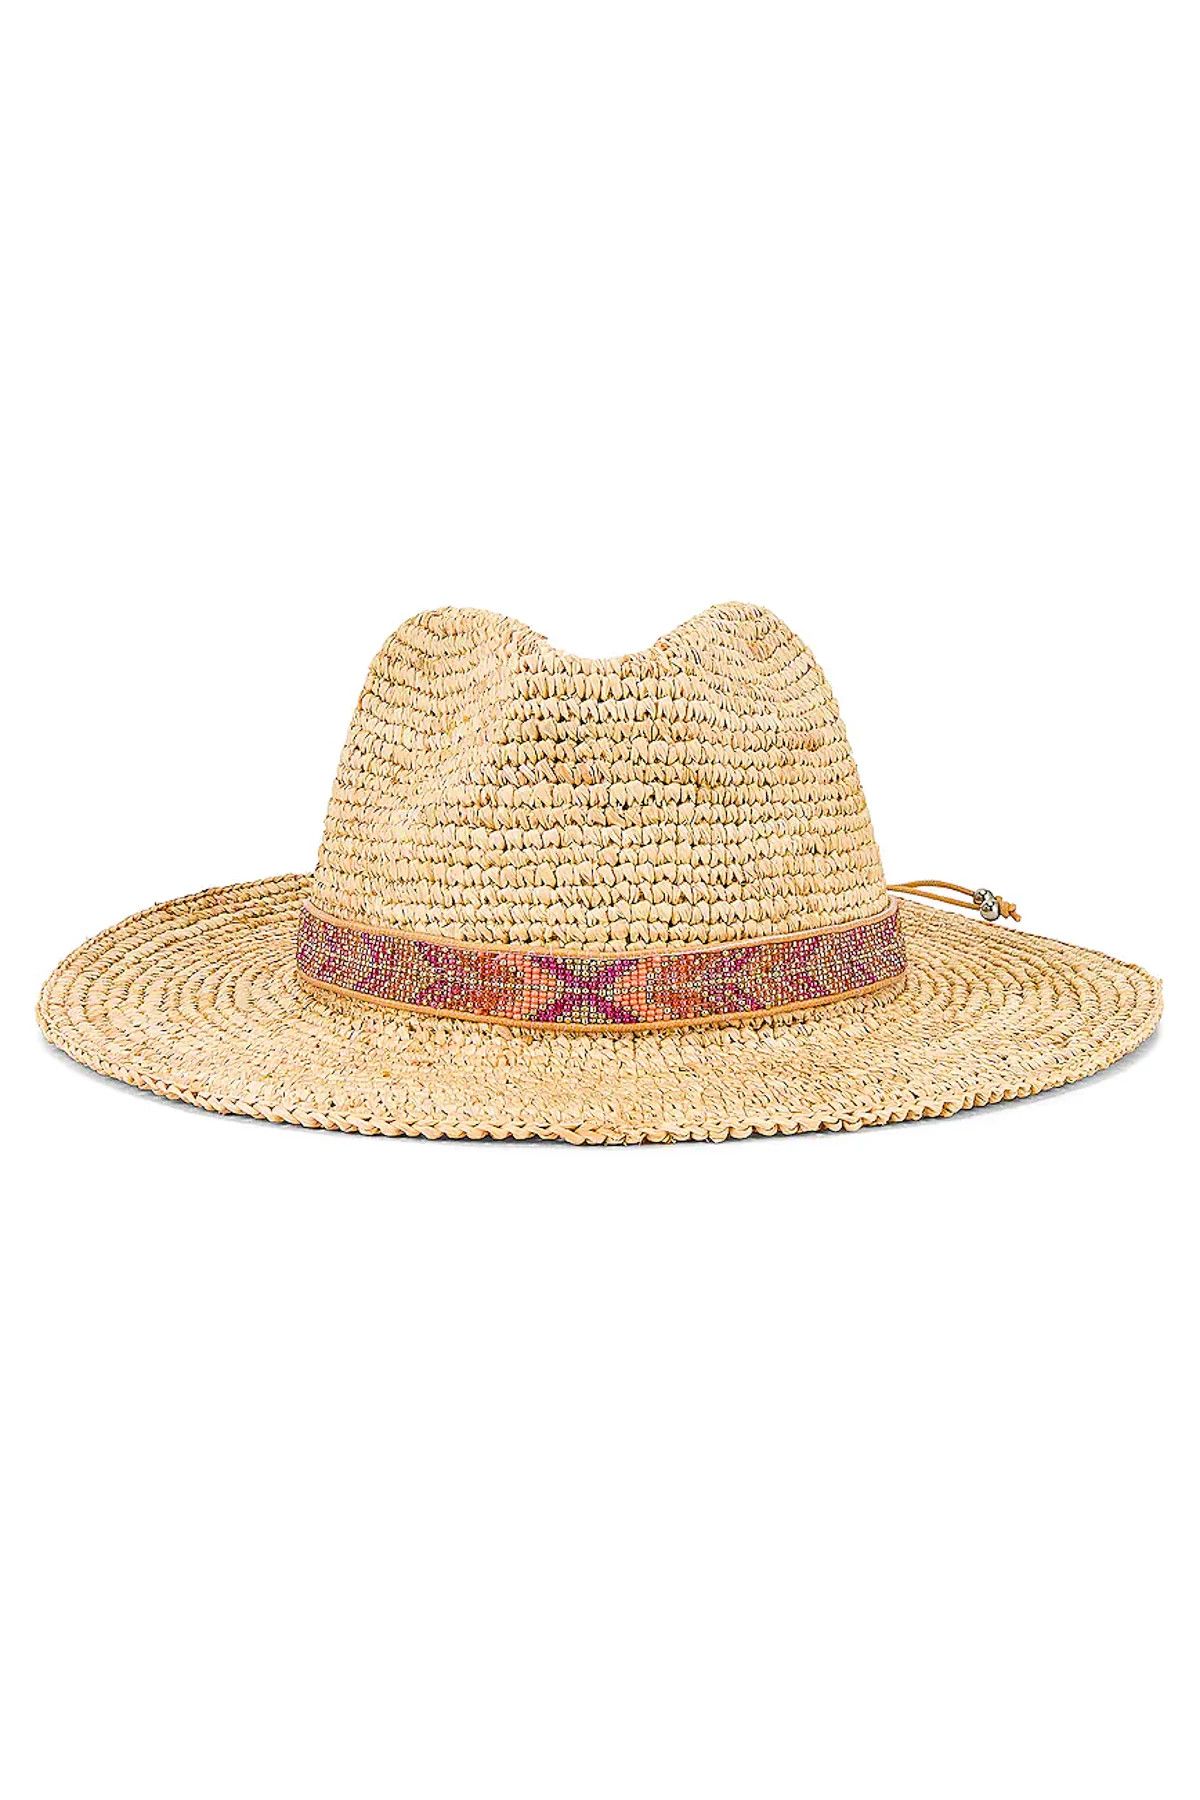 Alexis Panama Hat | Everything But Water